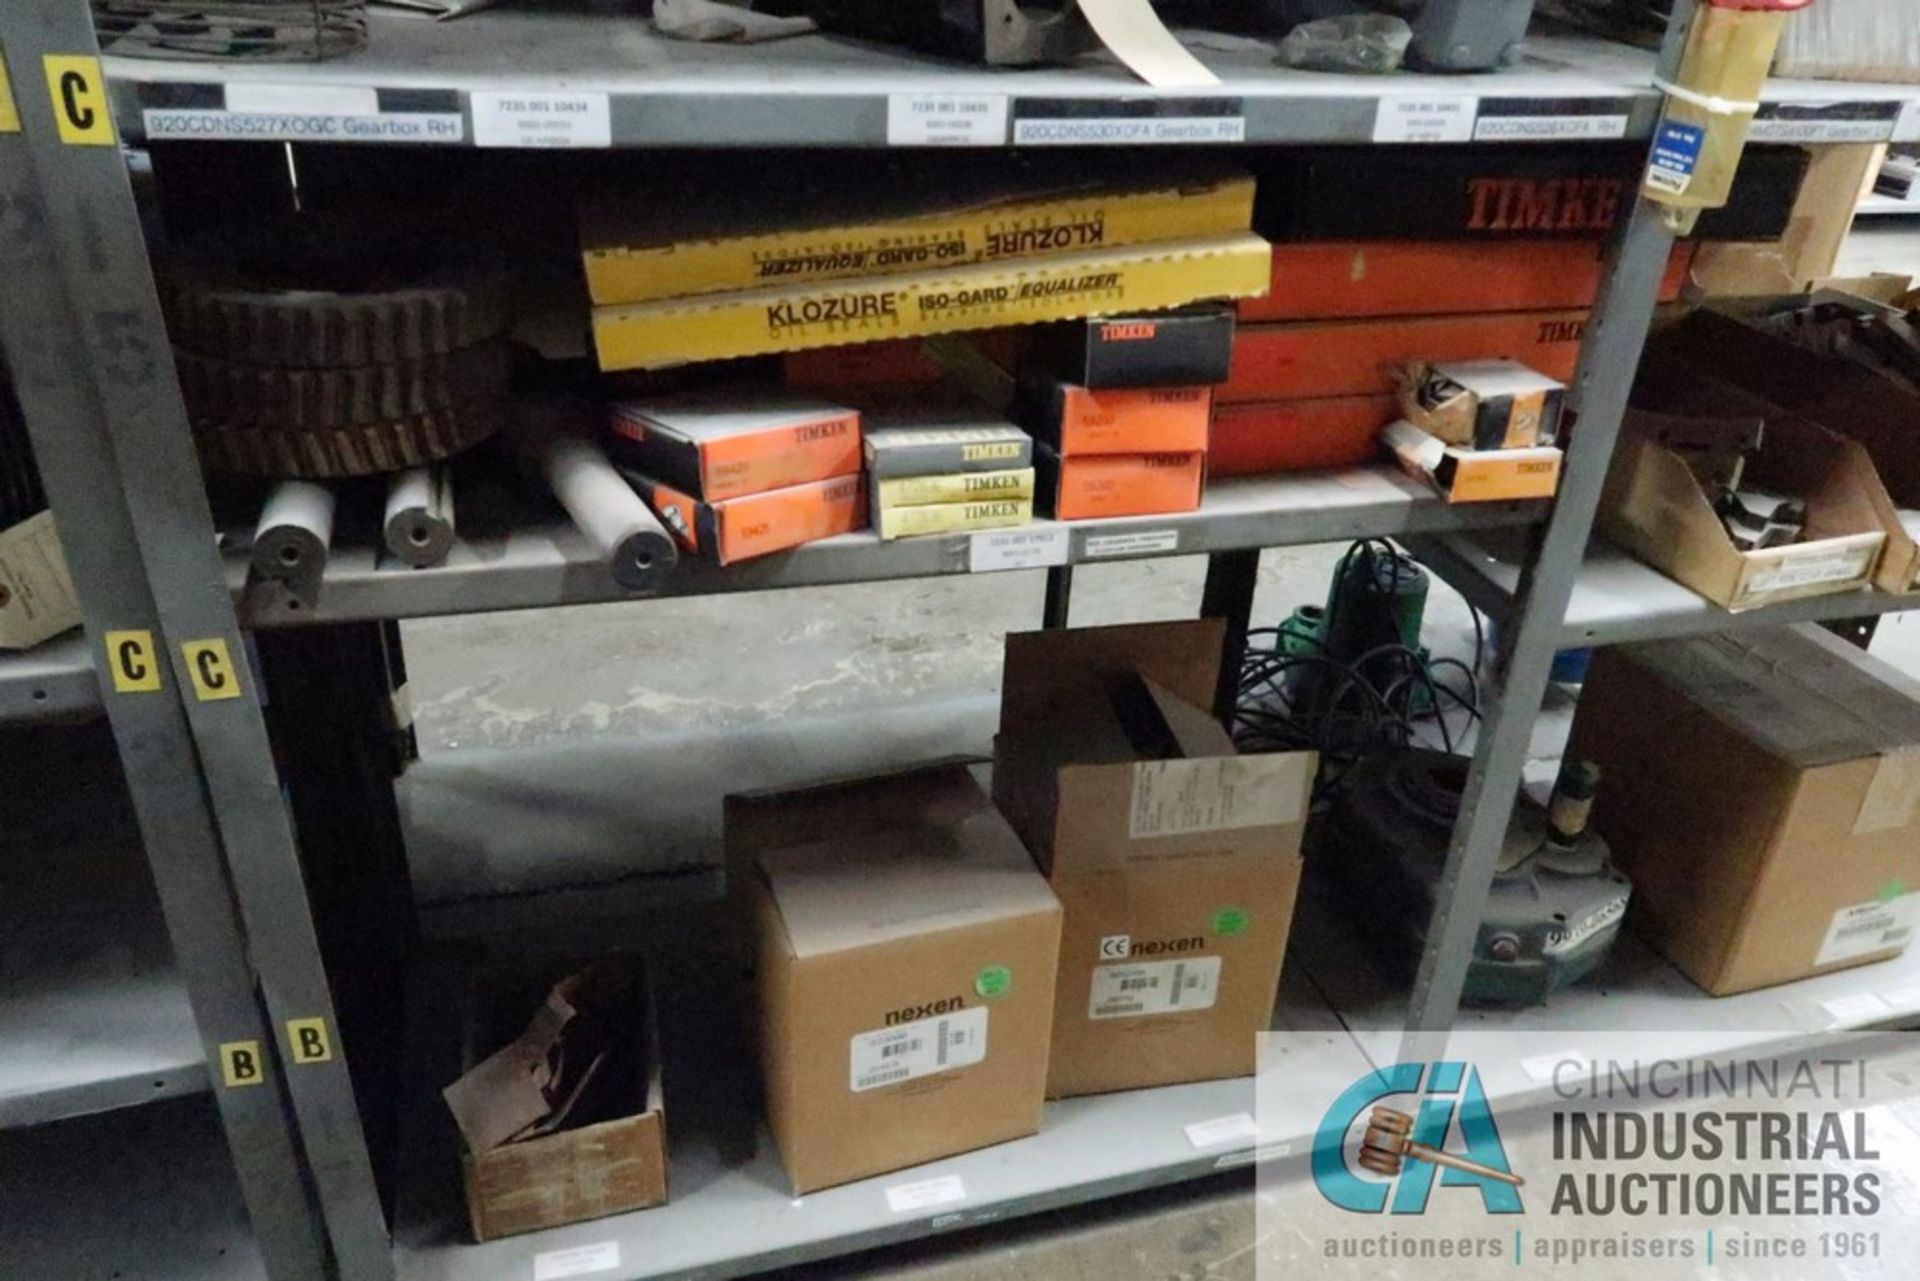 (LOT) (8) SECTIONS STEEL SHELVING W/ MISC. MODULES, CONTROLLERS, VELDING SYSTEMS, PUMPS, LIGHT - Image 14 of 16